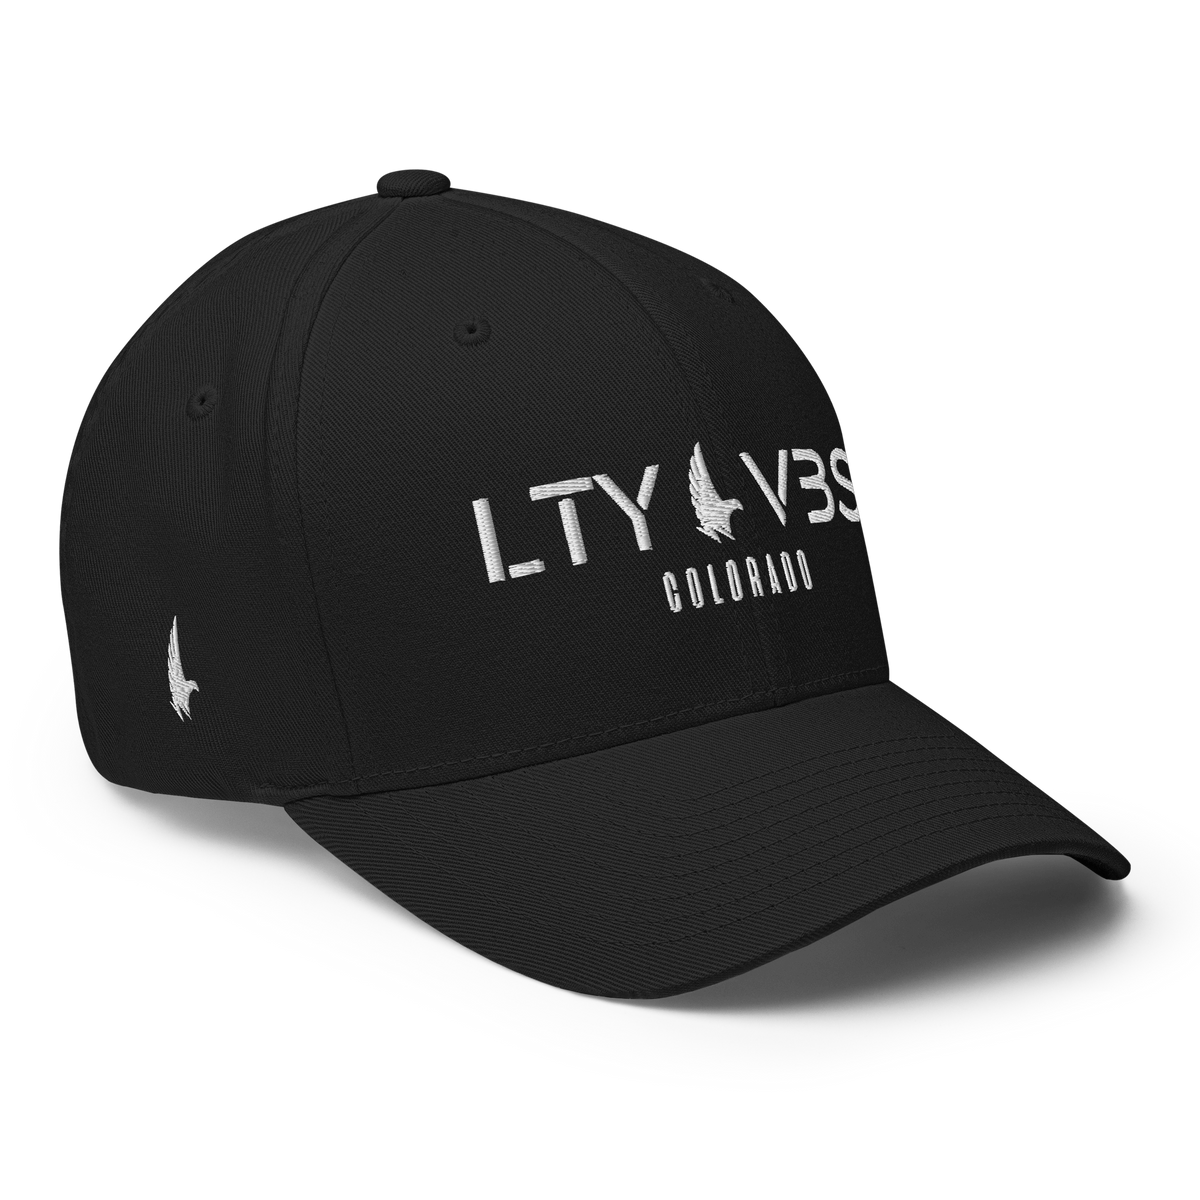 Loyalty Era Colorado Fitted Hat - Black / White Fitted - Loyalty Vibes